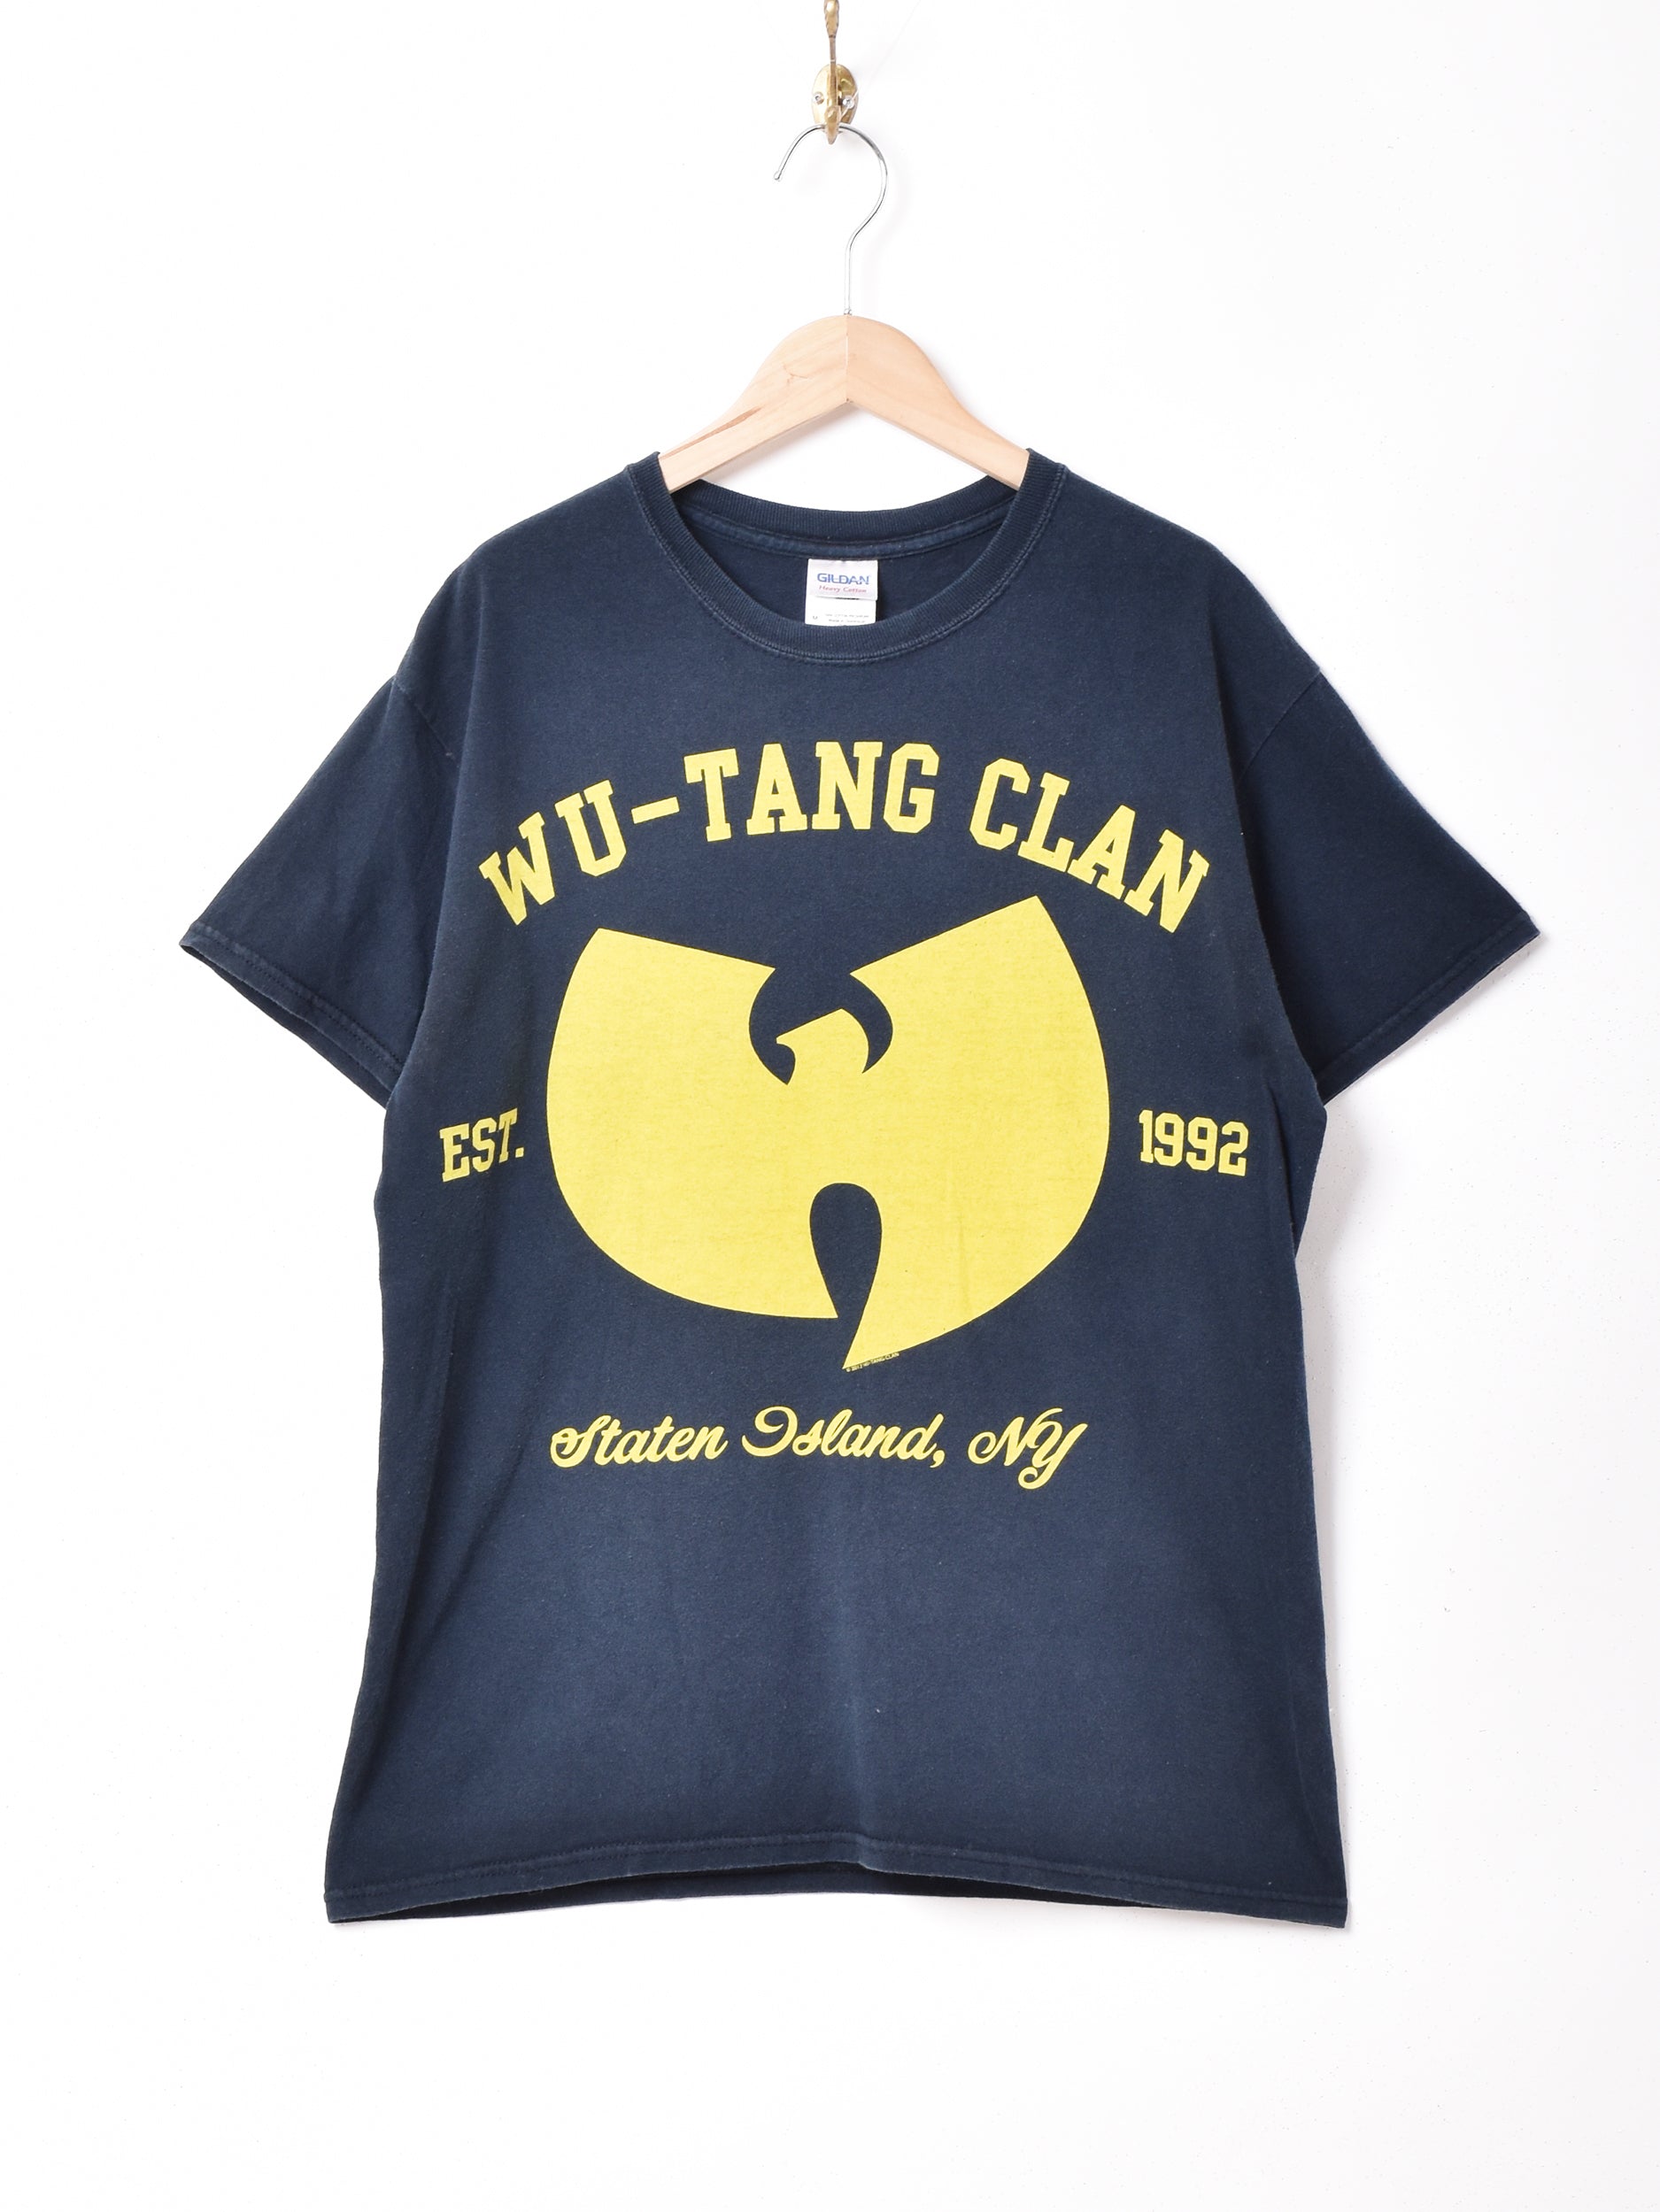 Wu-Tang Clan プリントTシャツ – 古着屋Top of the Hillのネット通販サイト